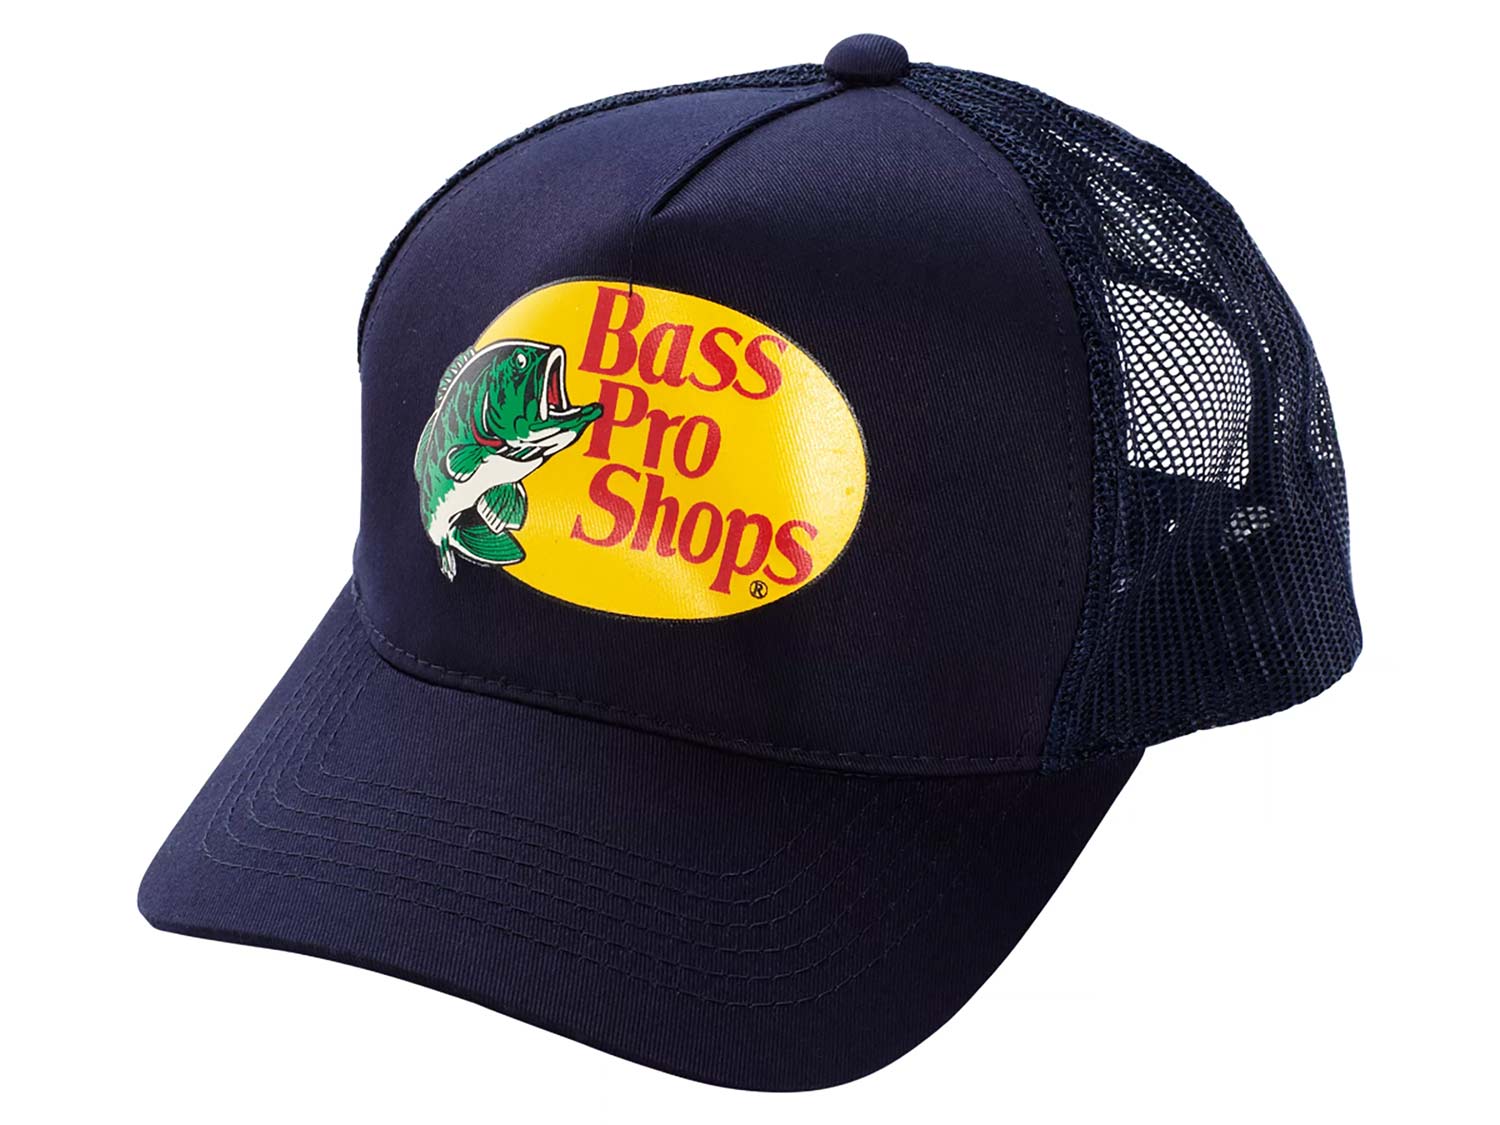 Best Fishing Hat: Apparel for Sun, Rain and Wind